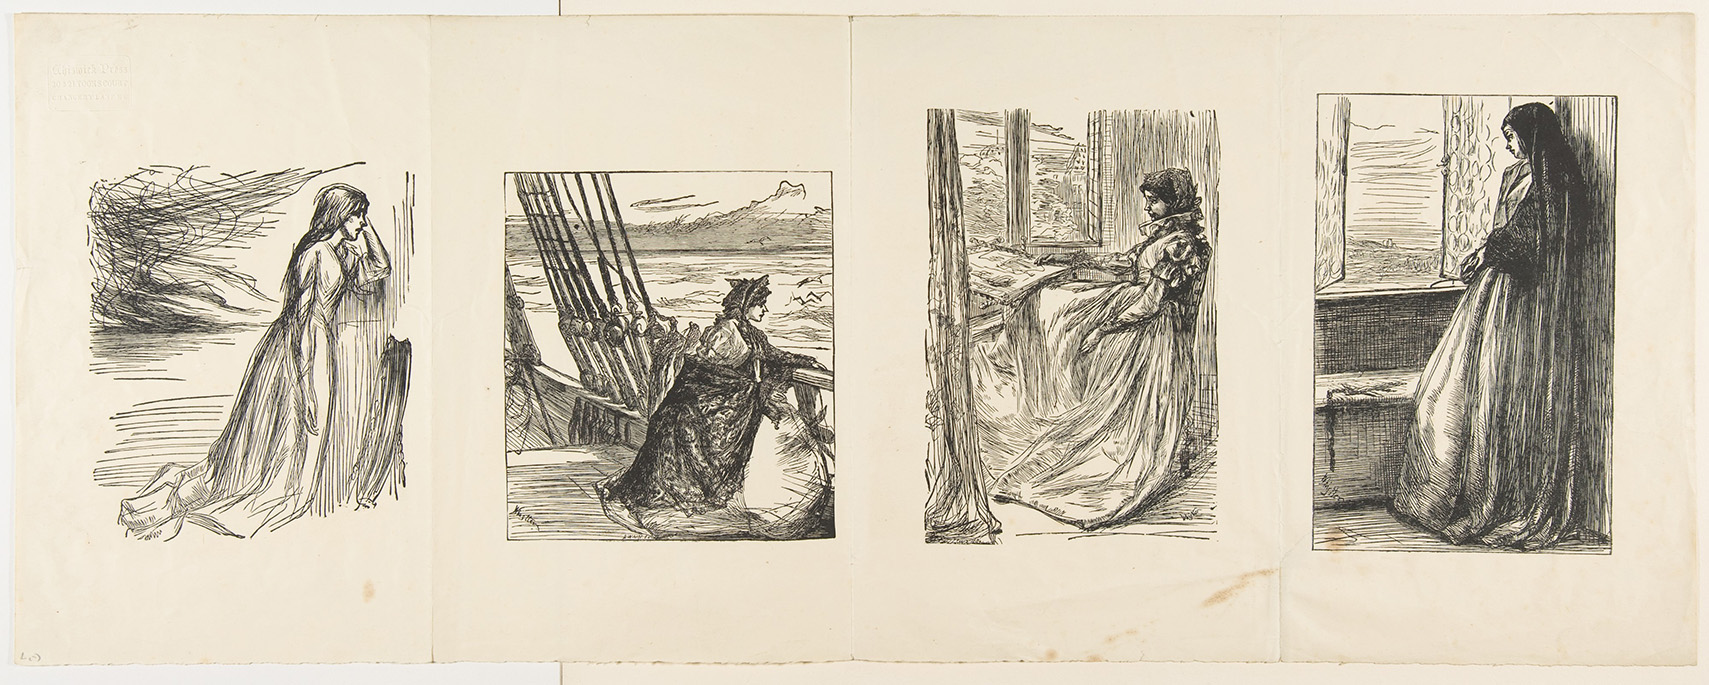 "The Relief Fund in Lancashire, The Major's Daughter, The Morning Before the Massacre of St. Bartholomew, and The Nun in 'Count Burkhardt' (Once a Week)," 1862 engraving after James McNeill Whistler (Courtesy of National Gallery of Art)